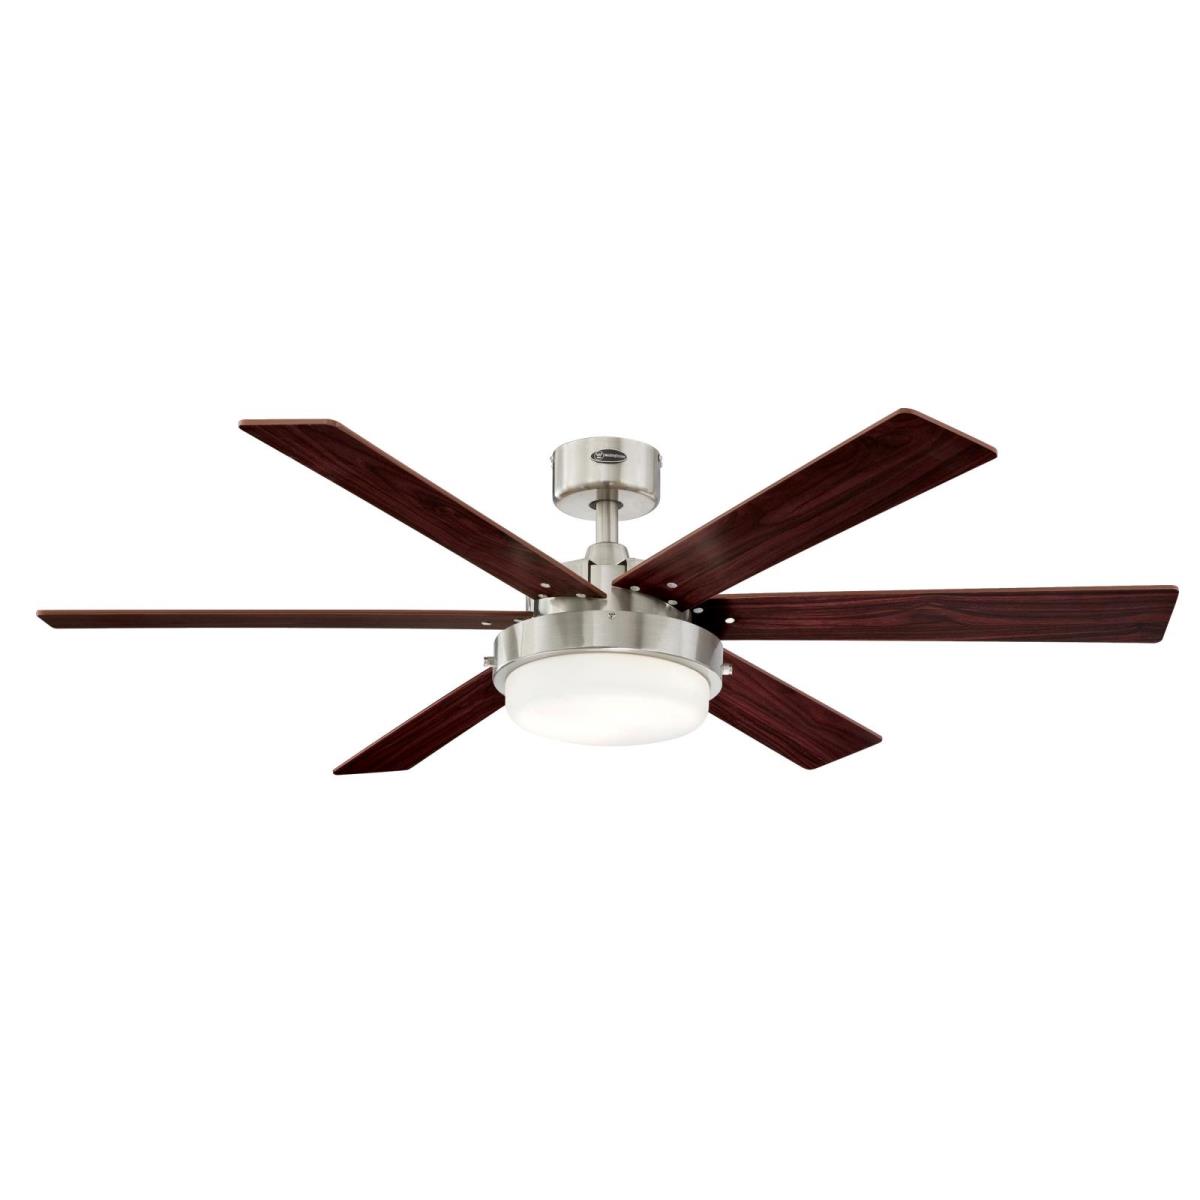 52" Brushed Nickel Finish Reversible Blades (Rosewood/Light Maple) Includes Light Kit with Opal Frosted Glass